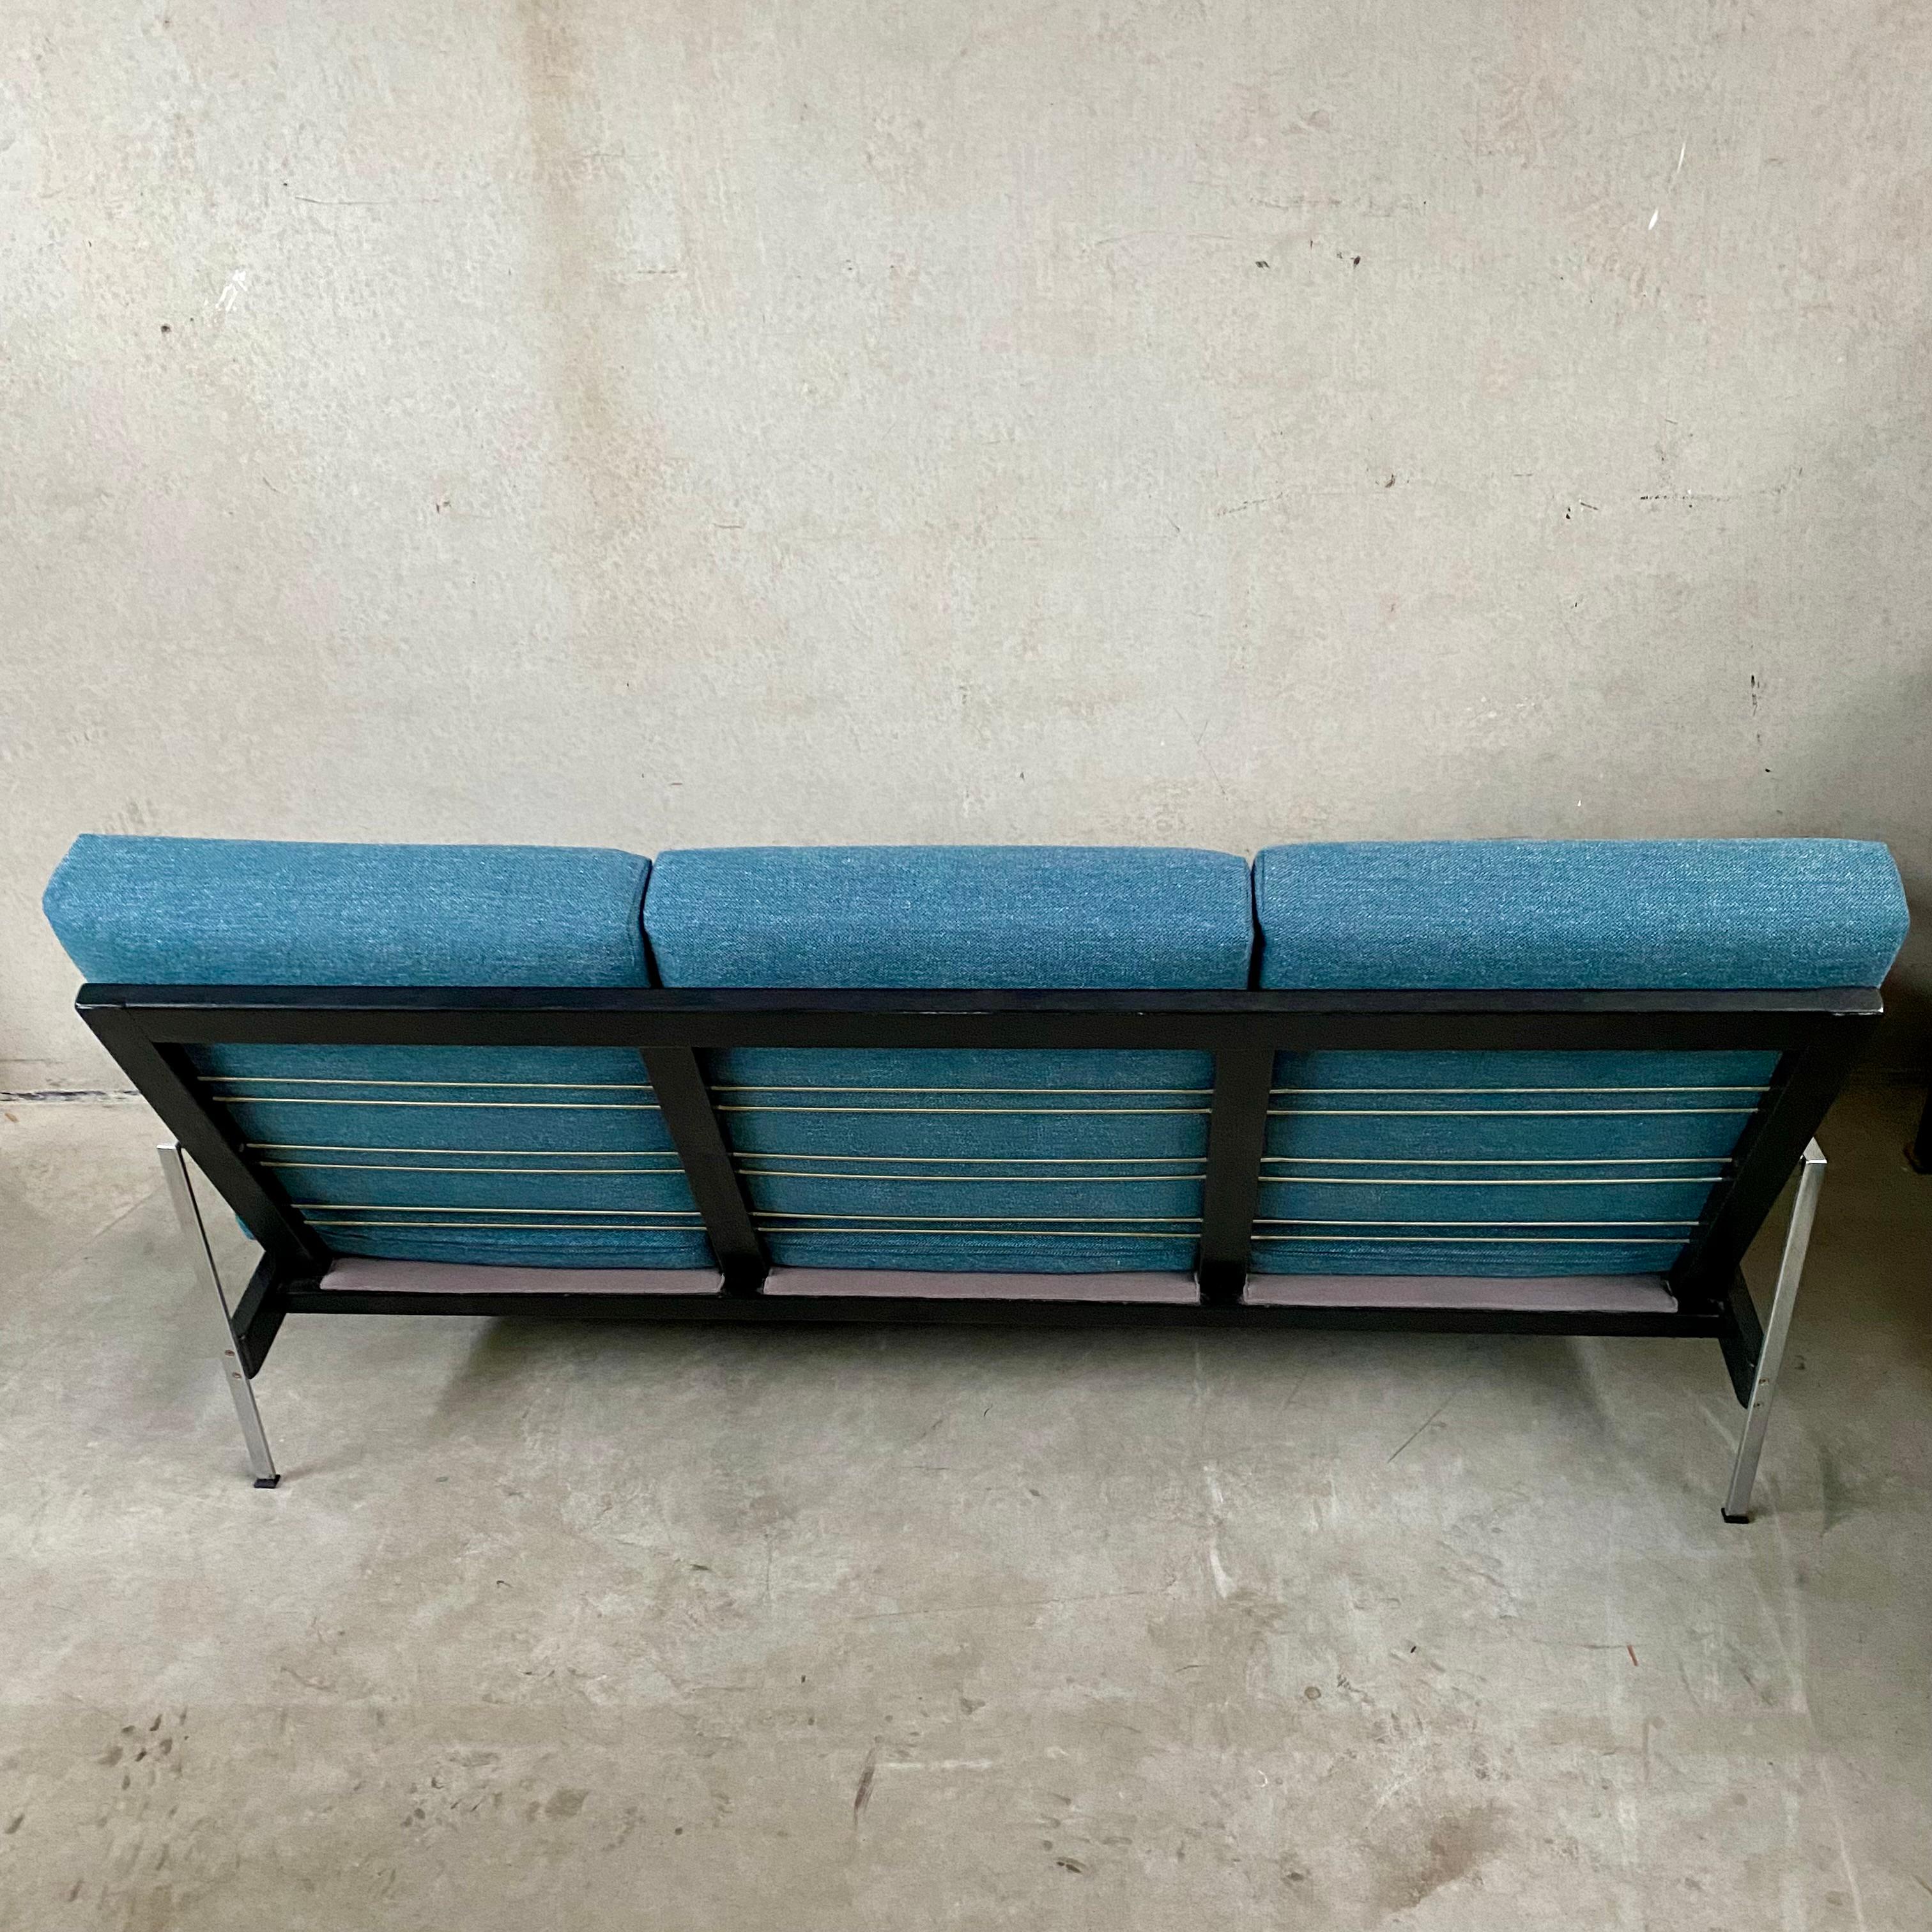 Upholstery 3-seater Sofa by Rob Parry for Gelderland, Netherlands 1970 For Sale